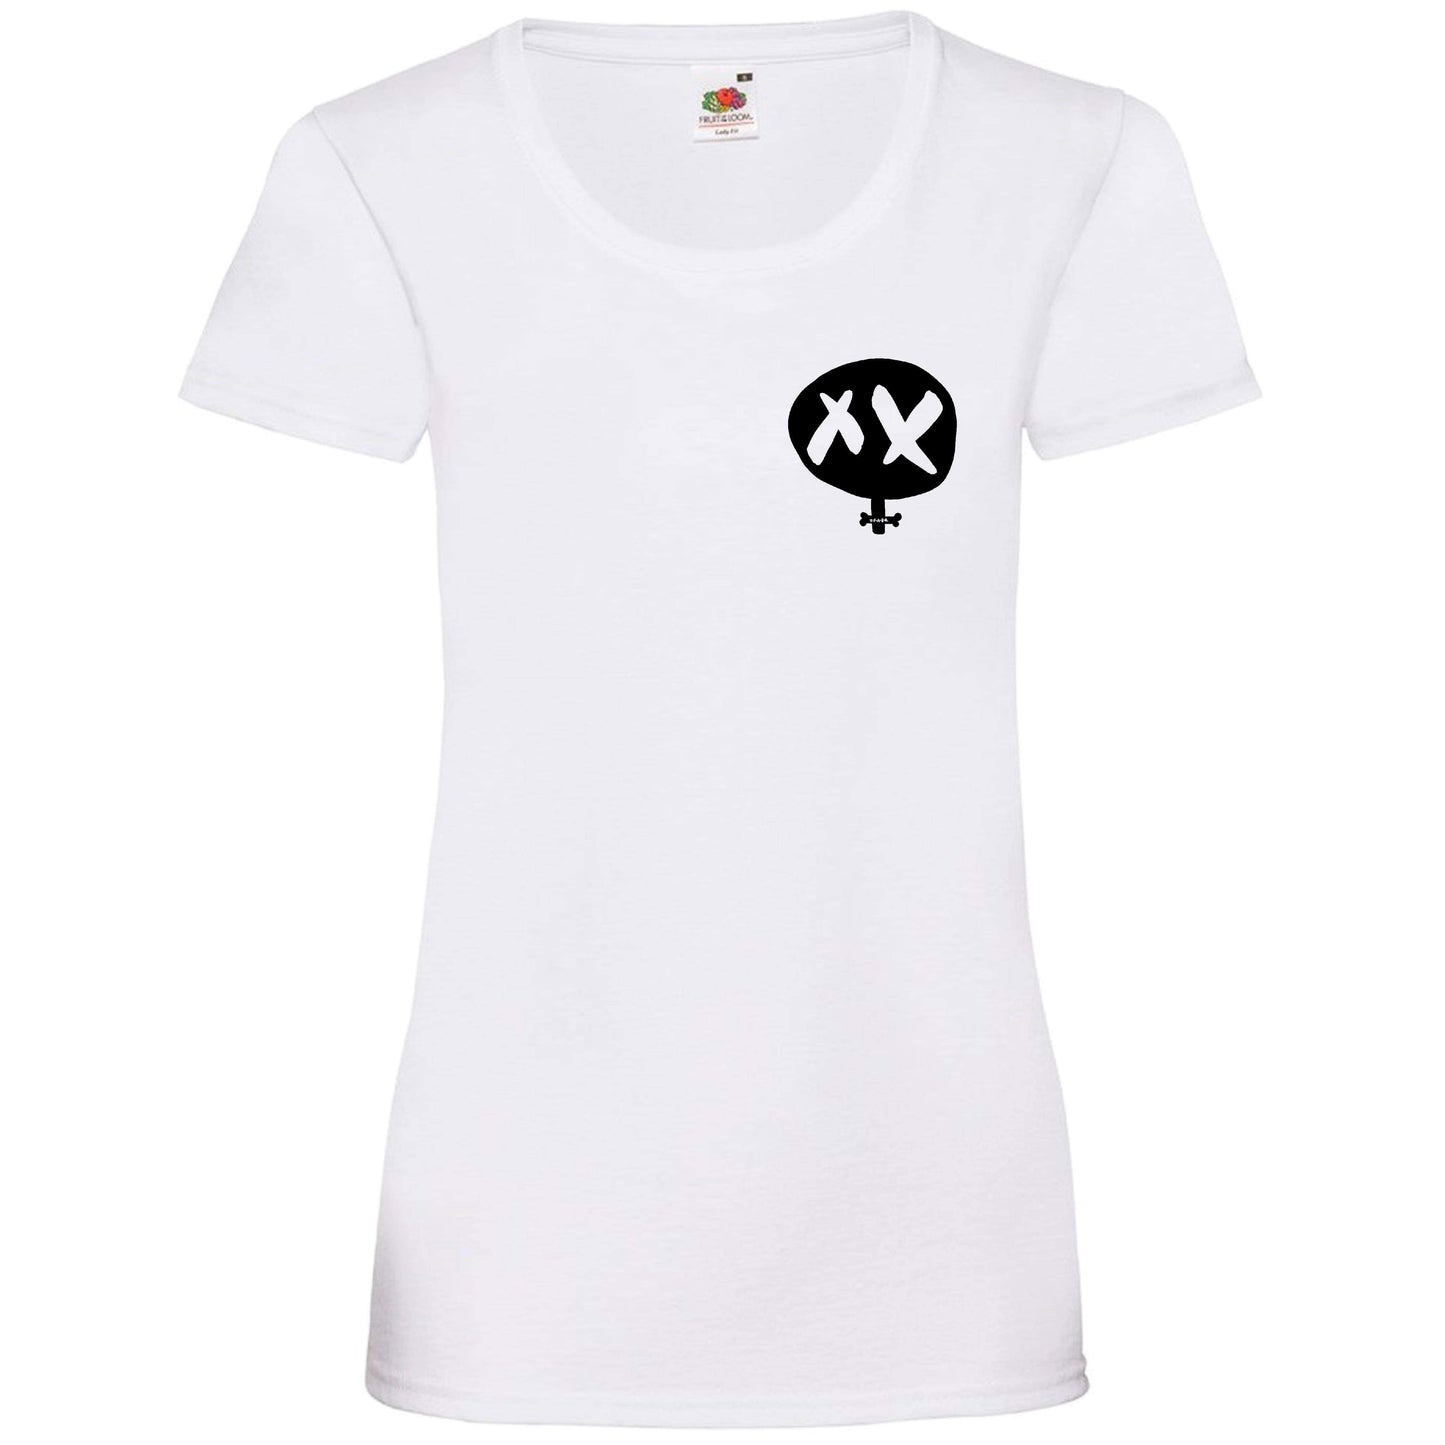 Female To The Bone - Front & Back Ladyfit T-Shirt